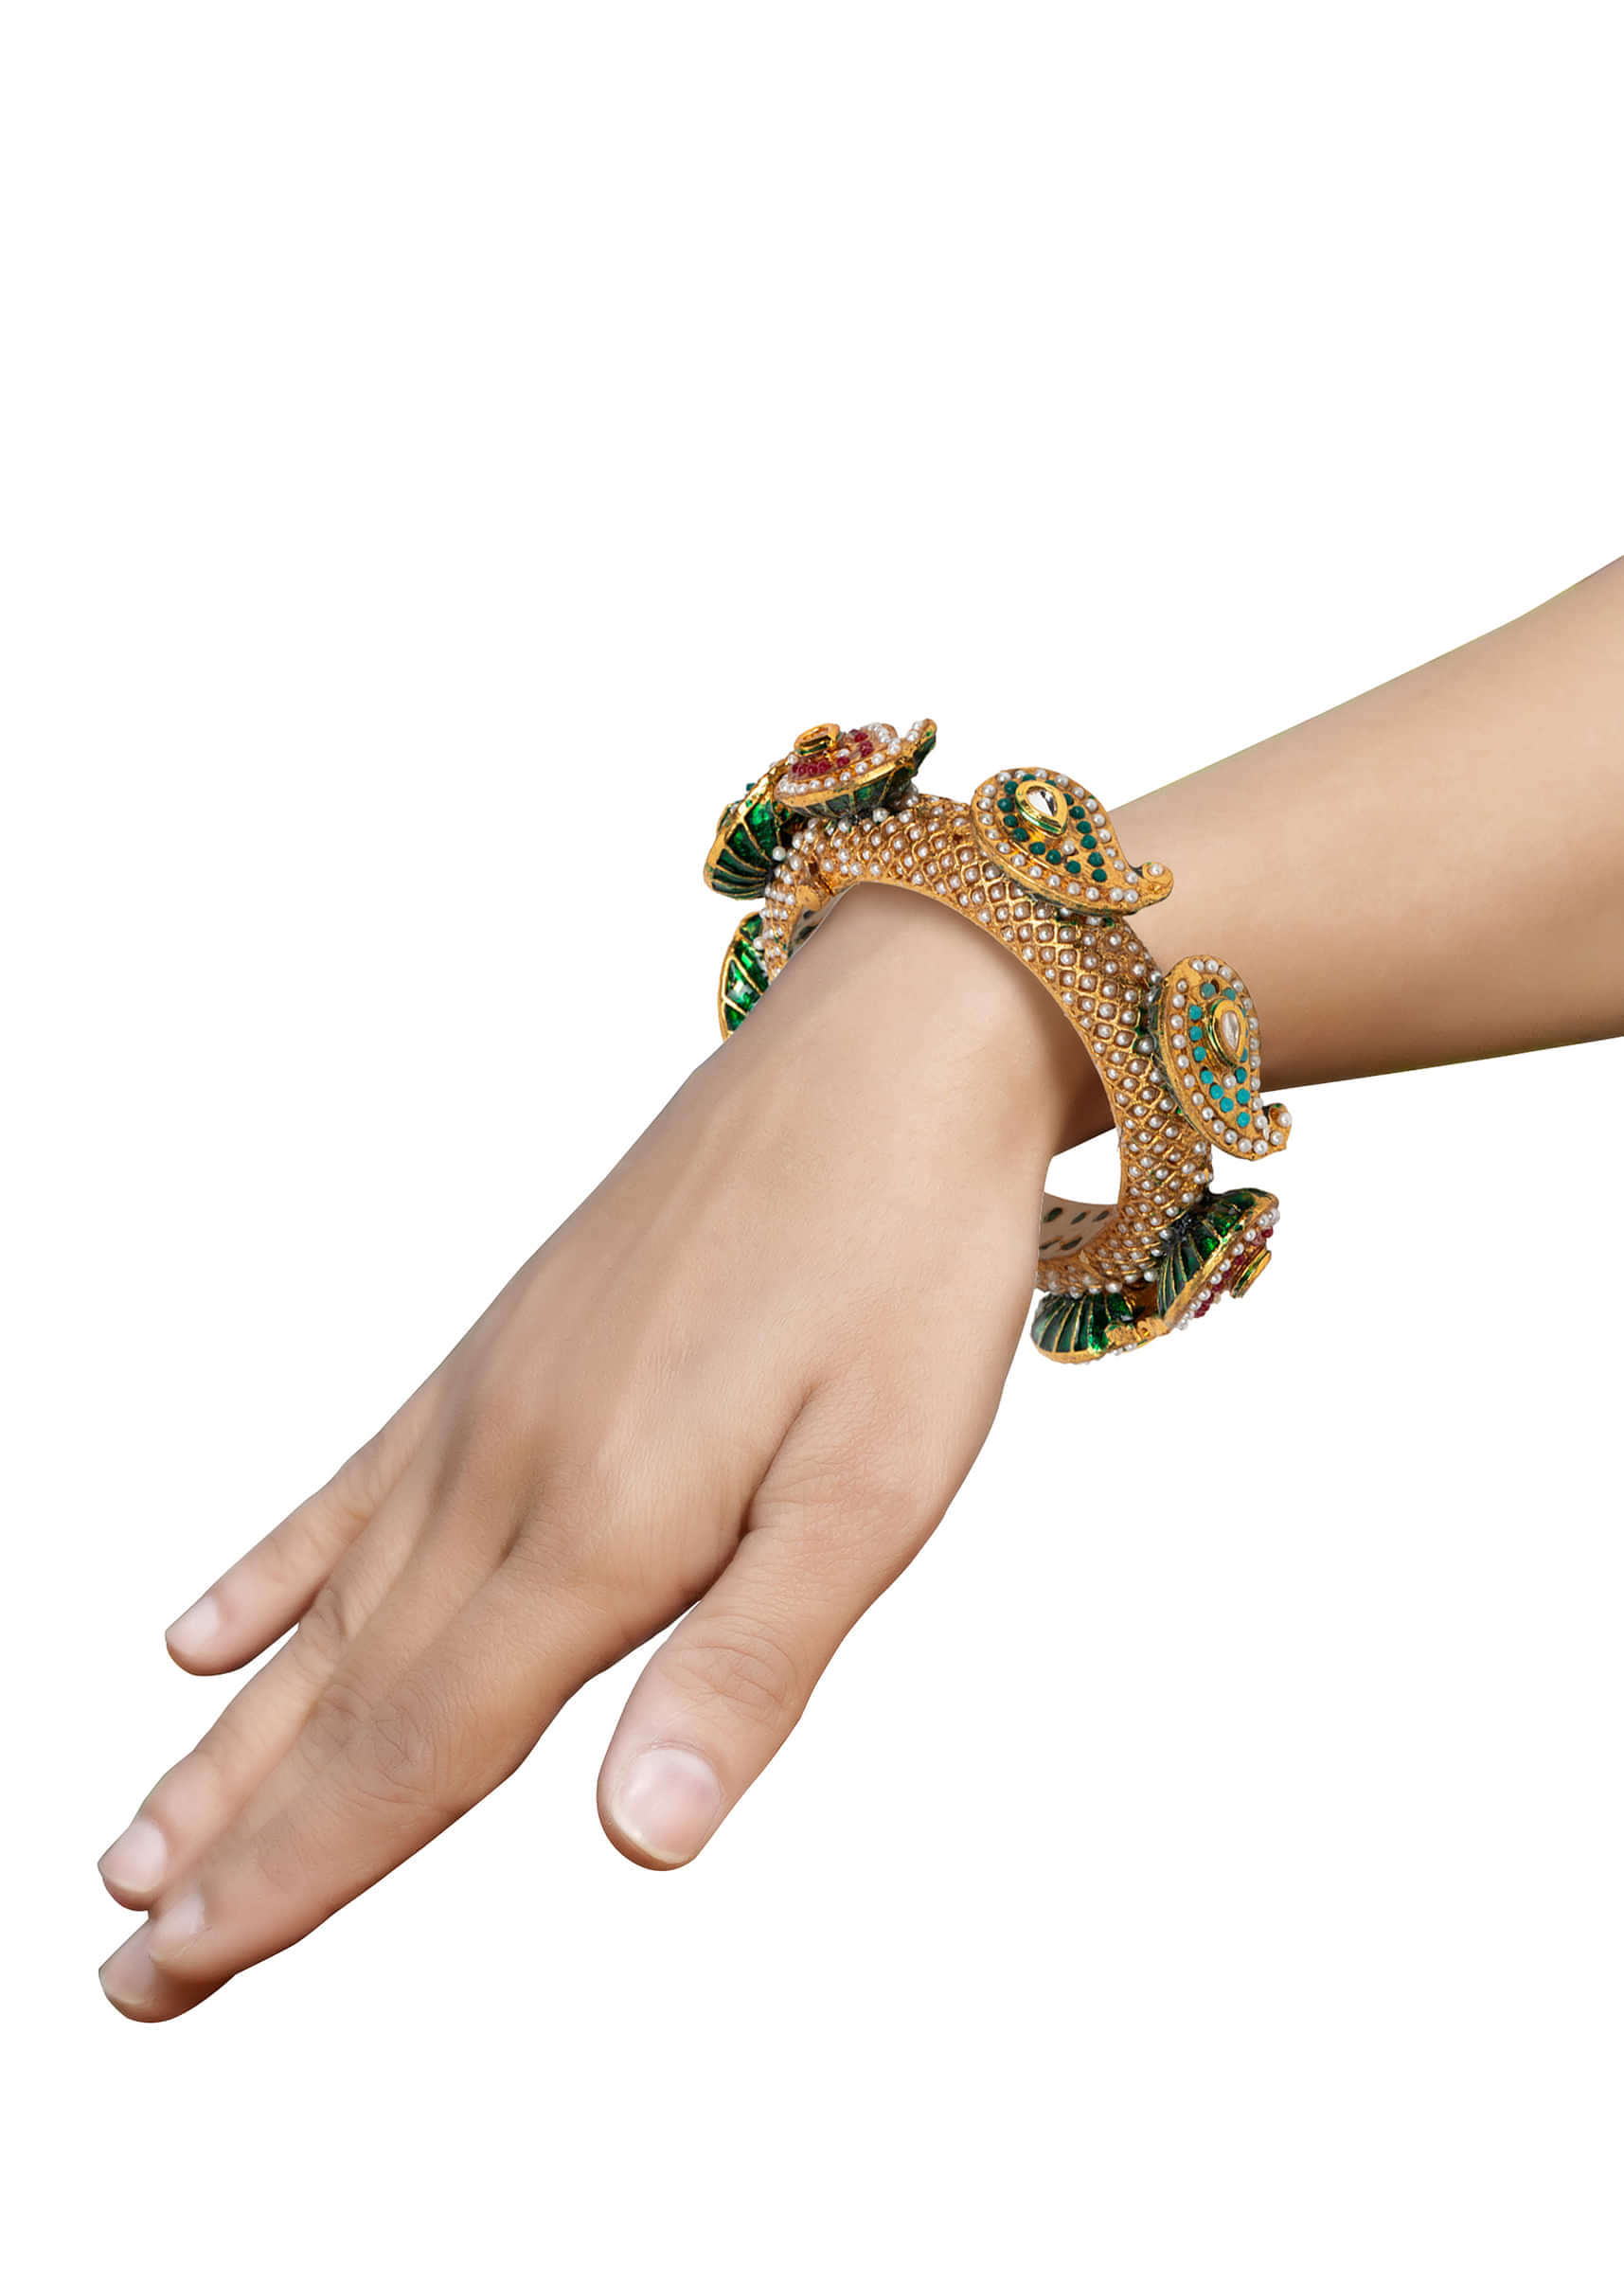 Gold Plated Rajwada Mango Pacheli Bangle With Multi Colored Stones And Pearls By Tizora